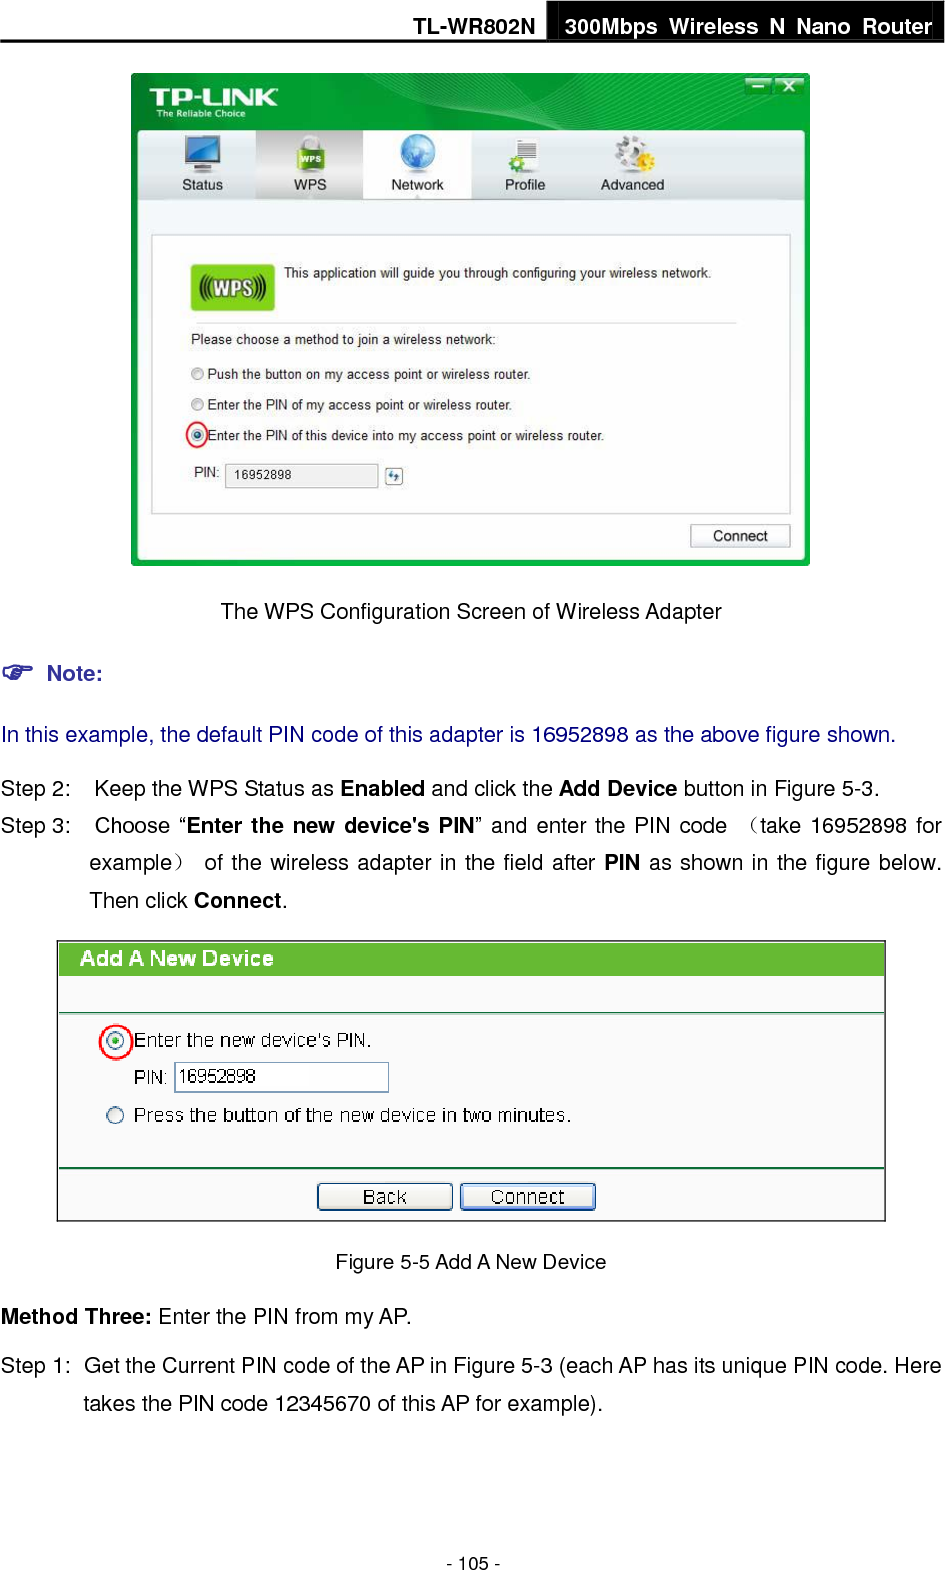 TL-WR802N 300Mbps  Wireless  N  Nano  Router  - 105 -  The WPS Configuration Screen of Wireless Adapter  Note: In this example, the default PIN code of this adapter is 16952898 as the above figure shown. Step 2:  Keep the WPS Status as Enabled and click the Add Device button in Figure 5-3. Step 3:  Choose “Enter the new device&apos;s PIN” and enter the PIN code  （take 16952898 for example）  of the wireless adapter in the field after PIN as shown in the figure below. Then click Connect.  Figure 5-5 Add A New Device Method Three: Enter the PIN from my AP. Step 1:  Get the Current PIN code of the AP in Figure 5-3 (each AP has its unique PIN code. Here takes the PIN code 12345670 of this AP for example). 